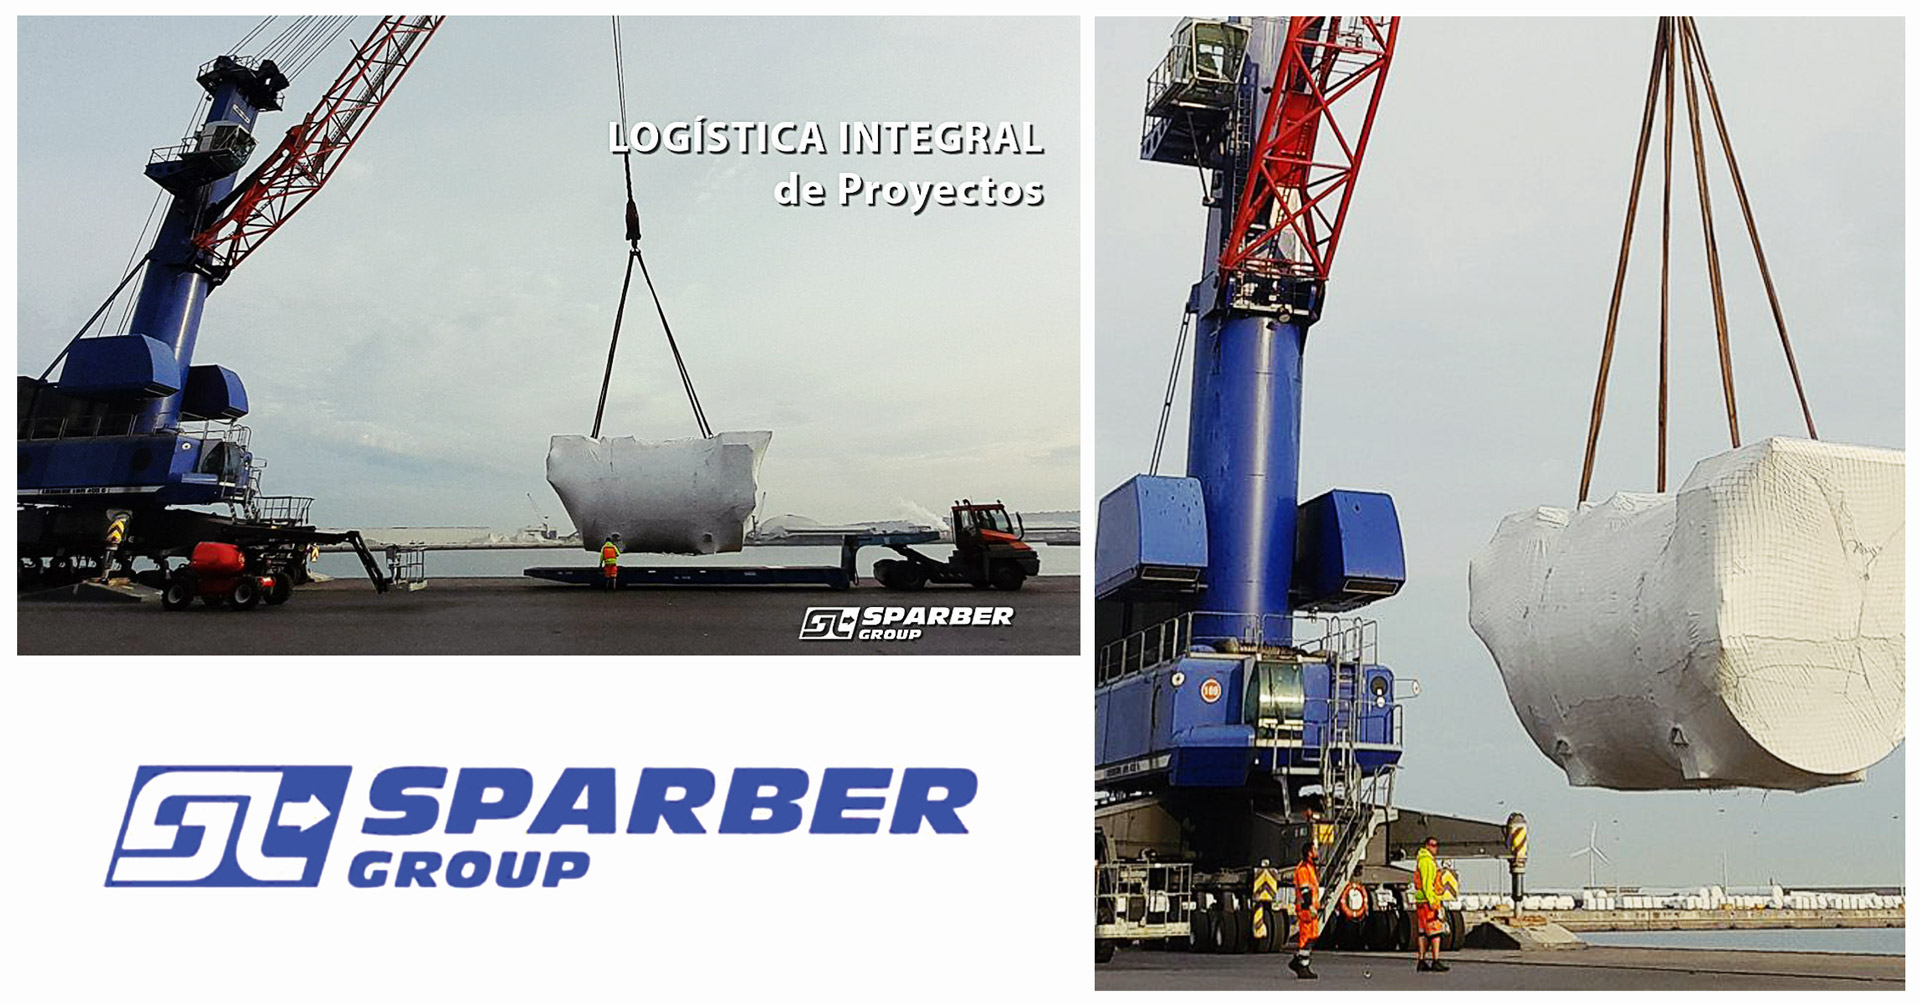 Sparber Group Transports a 69mt Piece of Cargo with Dimensions 1010 x 460 x 475 cm through Europe